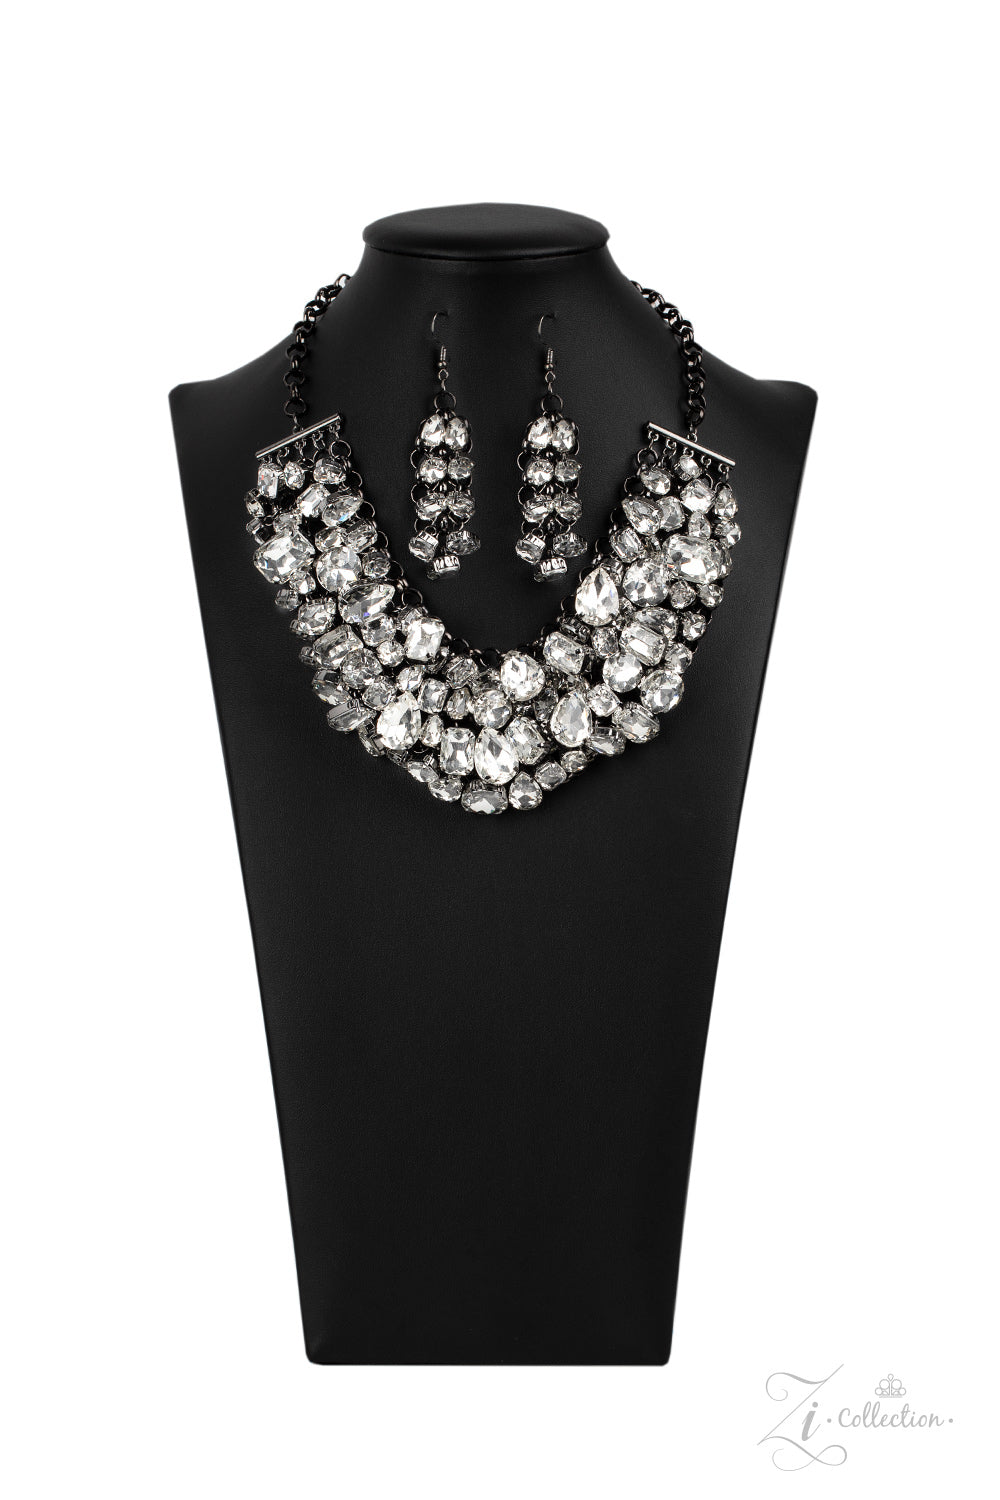 Ambitious - Paparazzi Zi Collection necklace